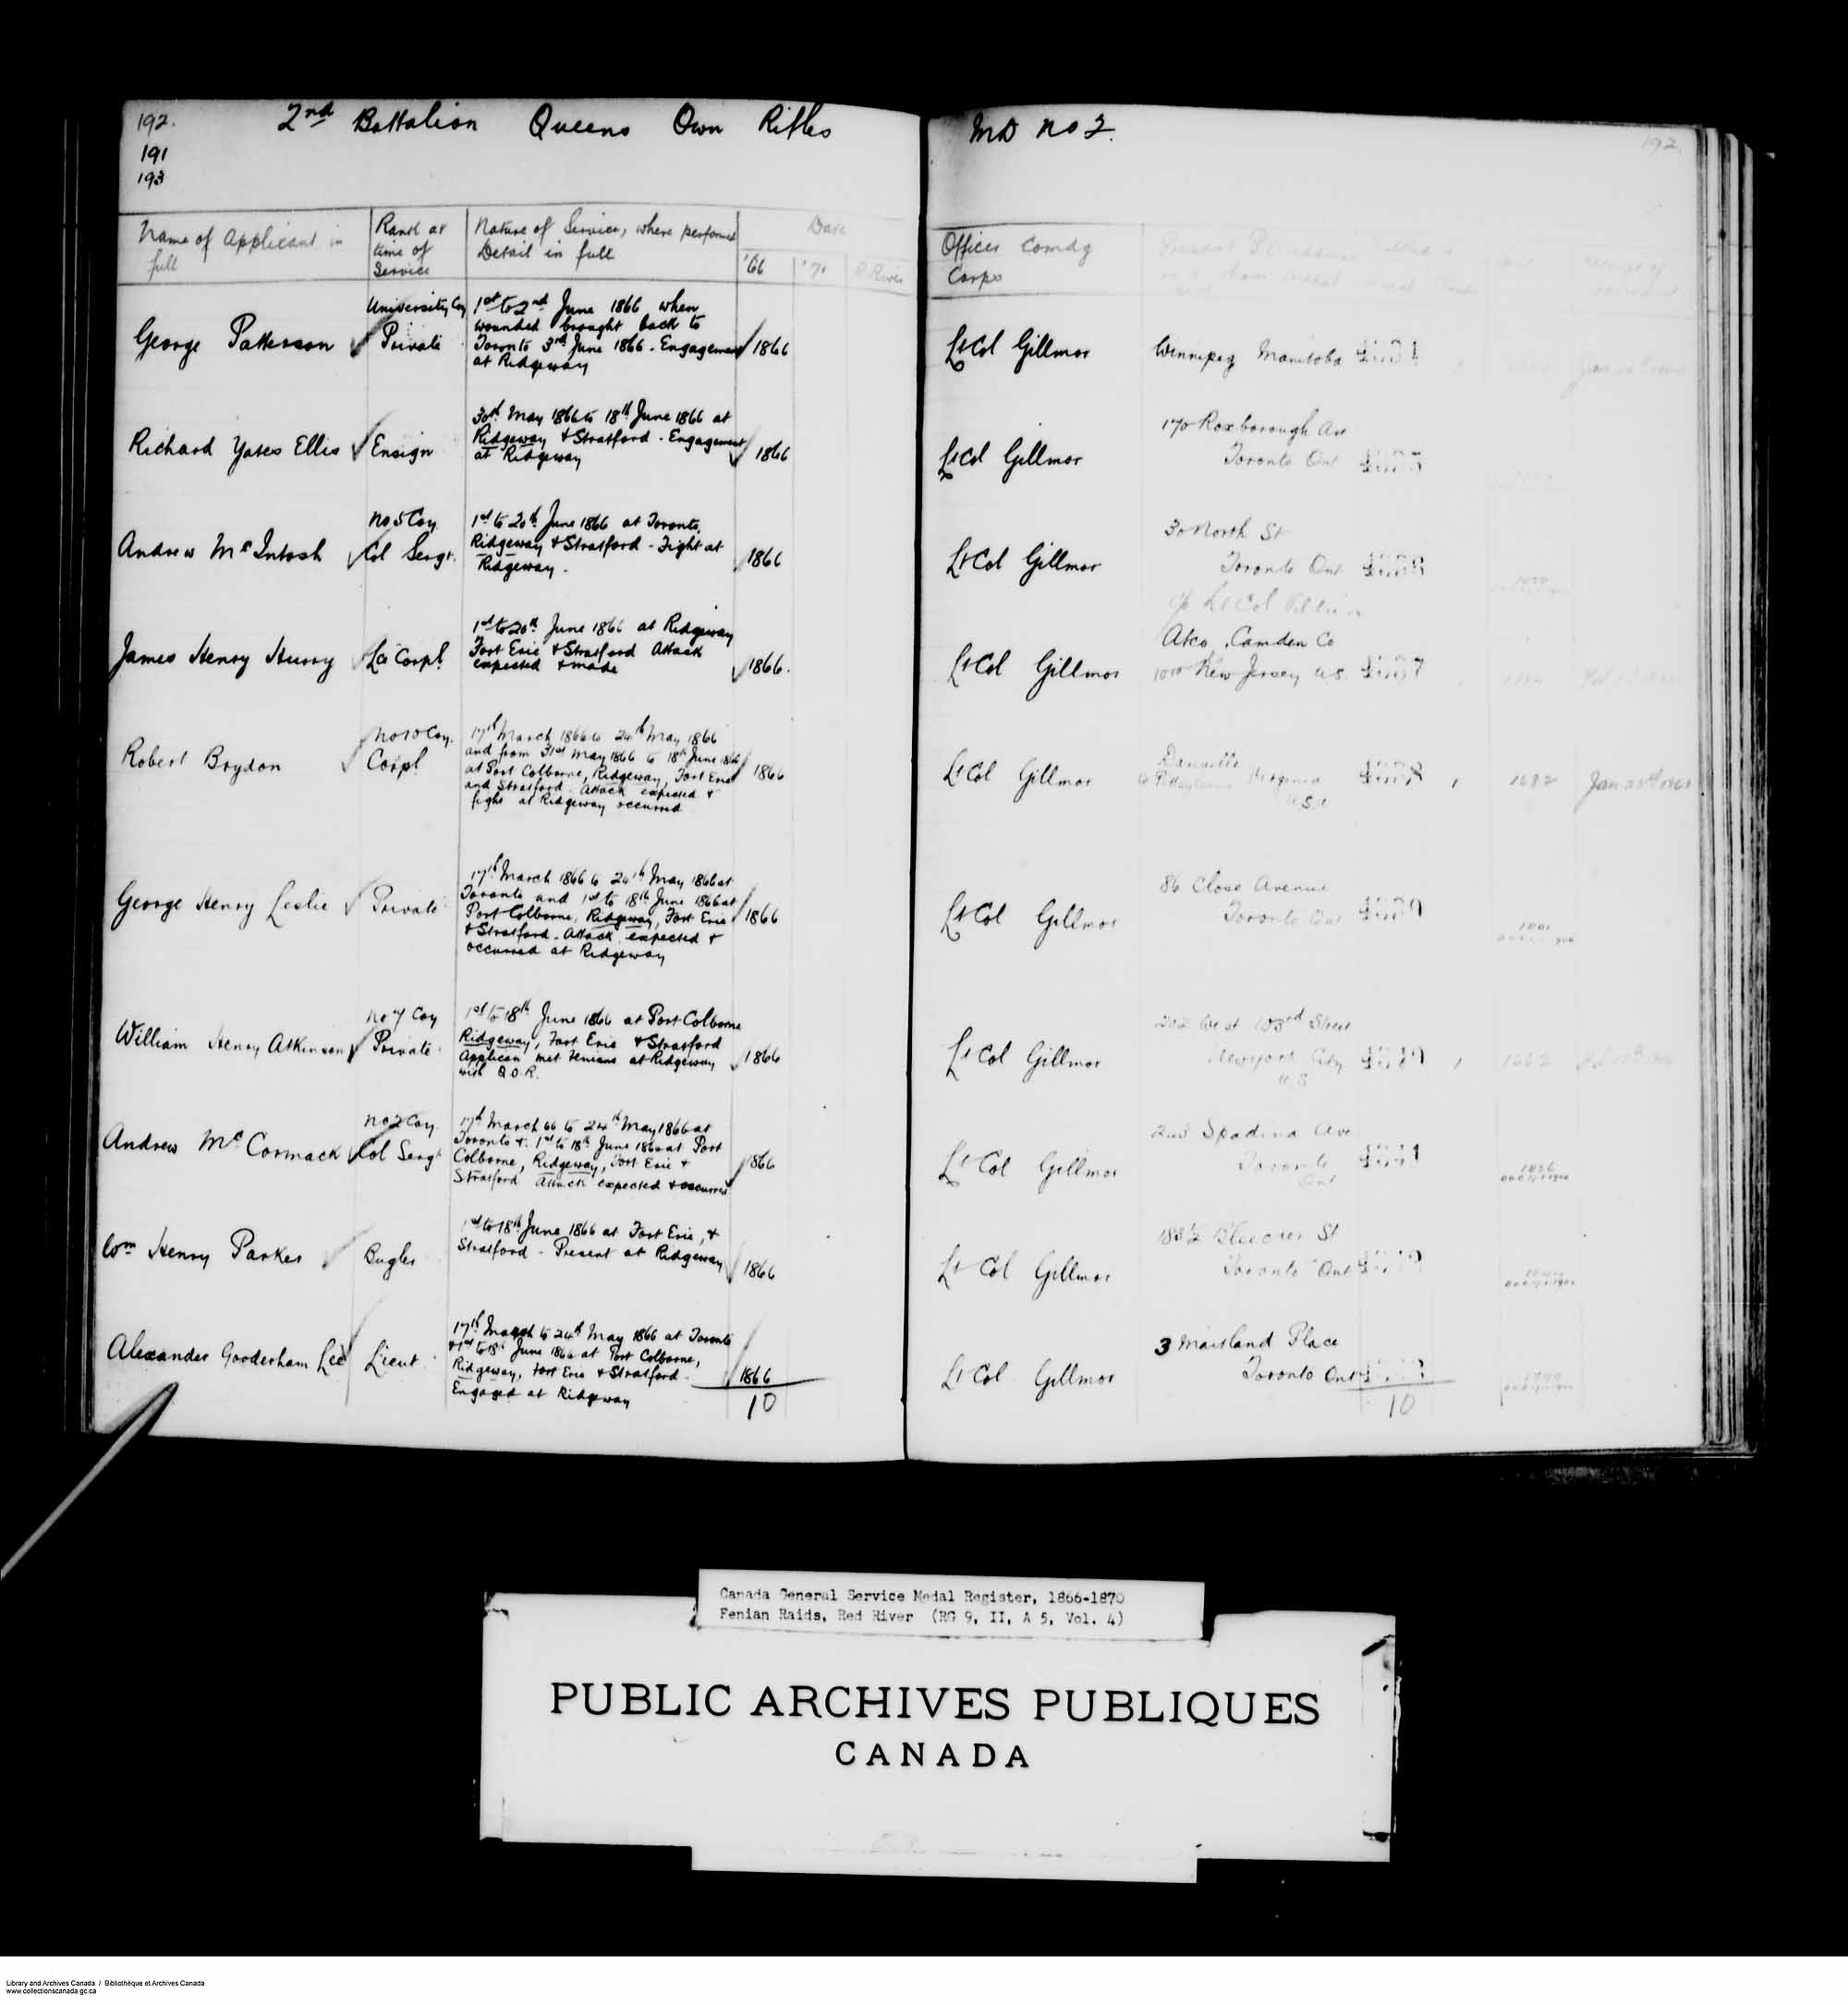 Digitized page of Medals, Honours and Awards for Image No.: e008681879